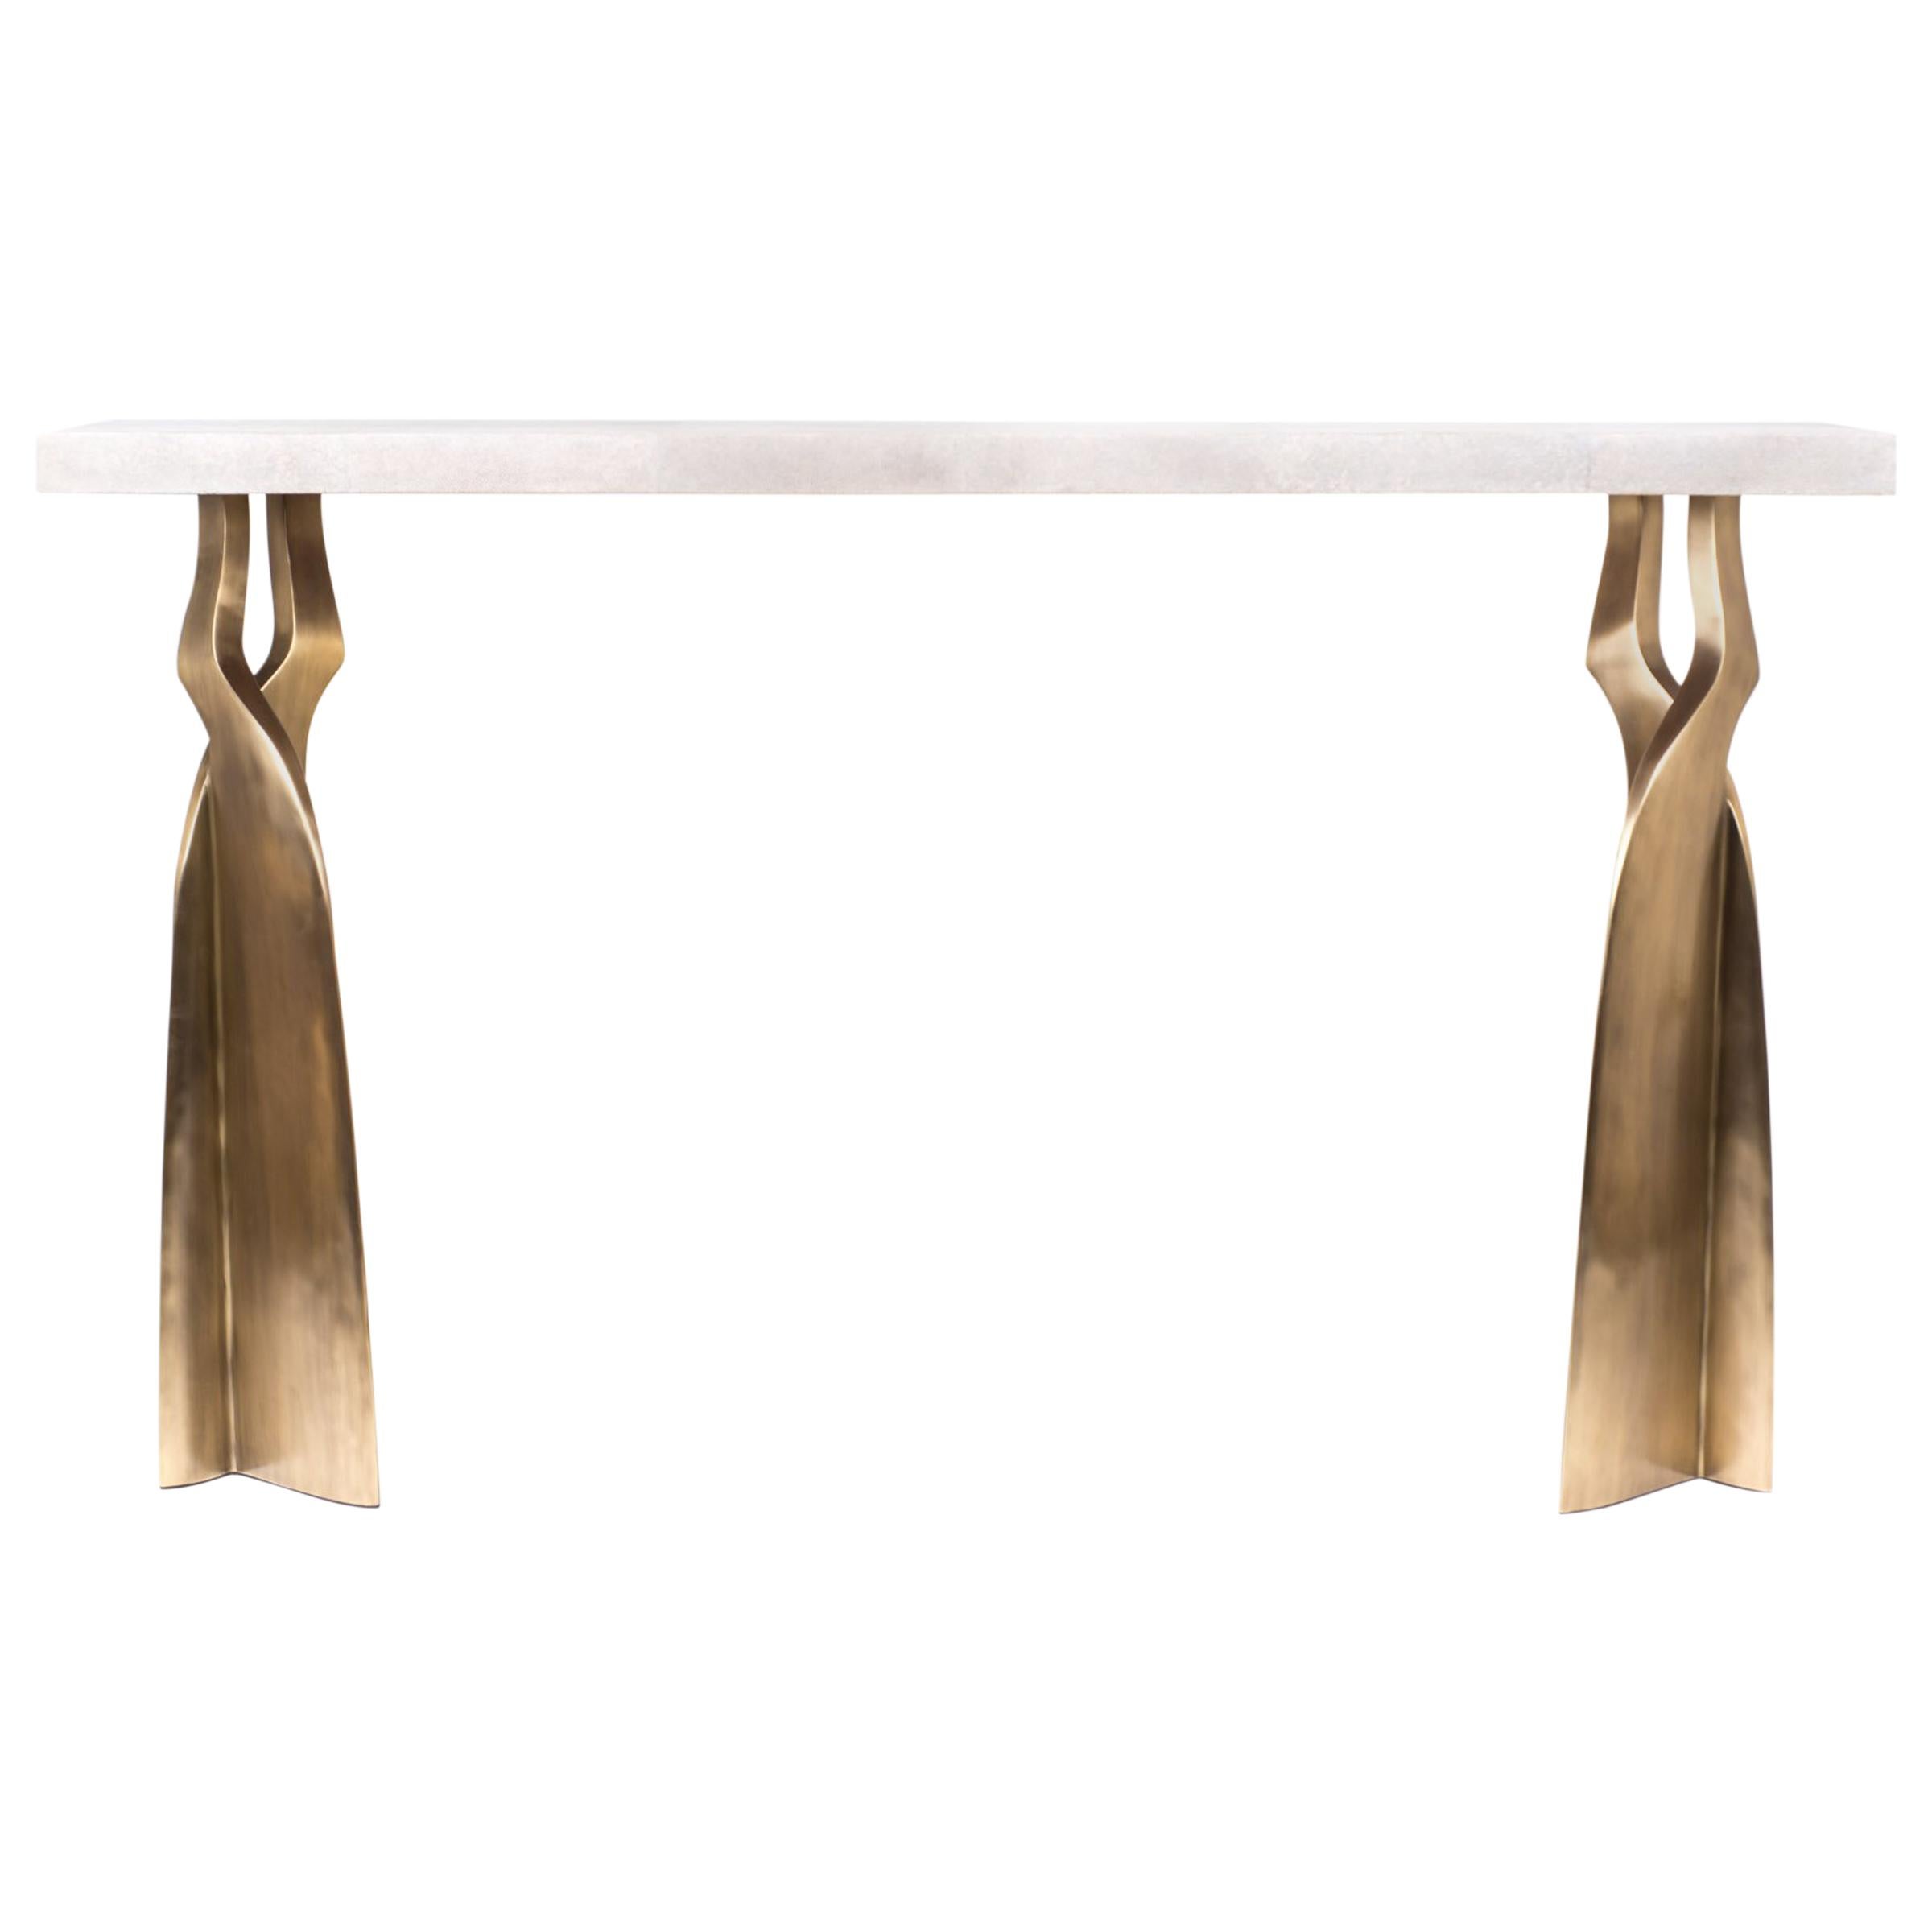 The Chital console table is both dramatic and organic it’s unique design. The purple shagreen inlaid top sits on a pair of ethereal & sculptural bronze-patina brass legs. This piece is designed by Kifu Augousti the daughter of Ria and Yiouri